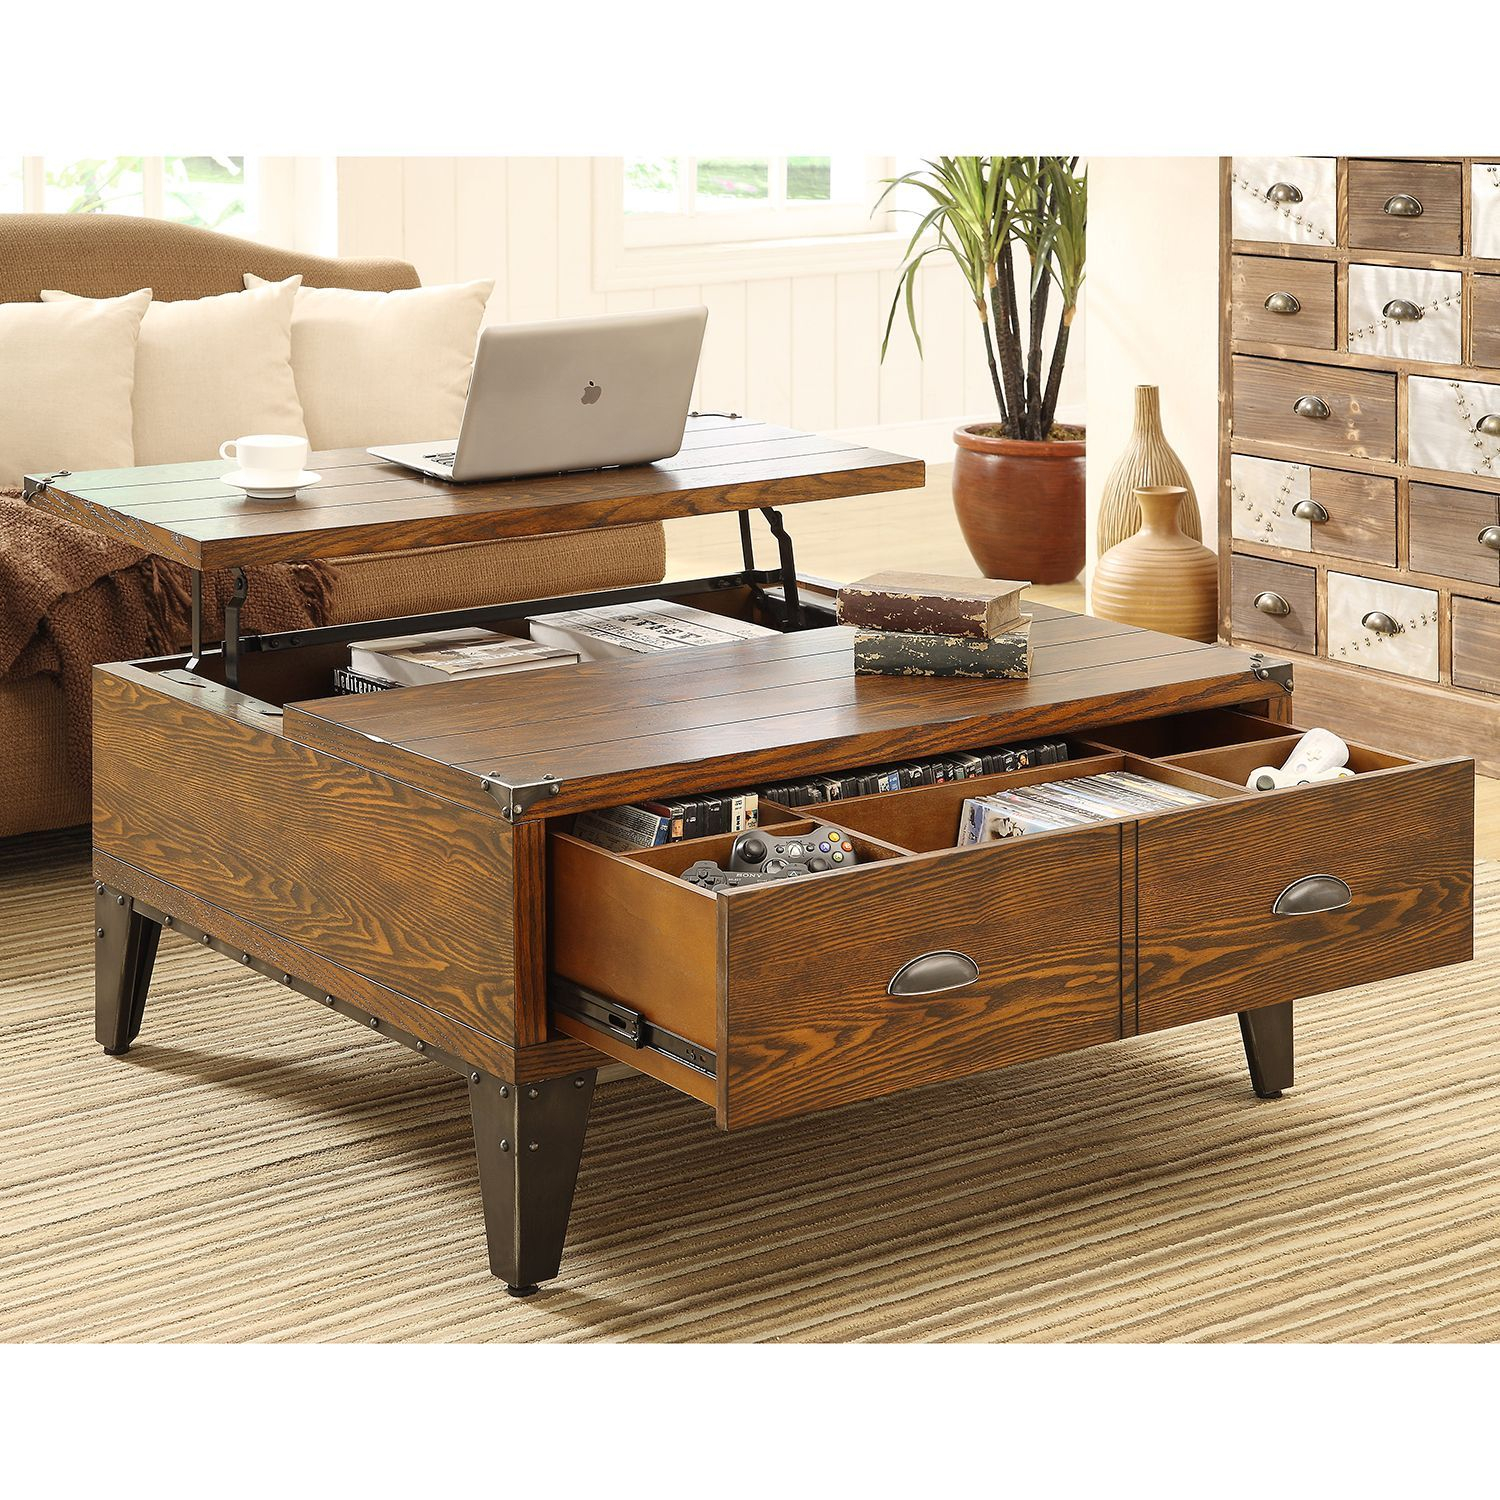 Wellington Lift Top Coffee Table Sams Club For The Home regarding proportions 1500 X 1500